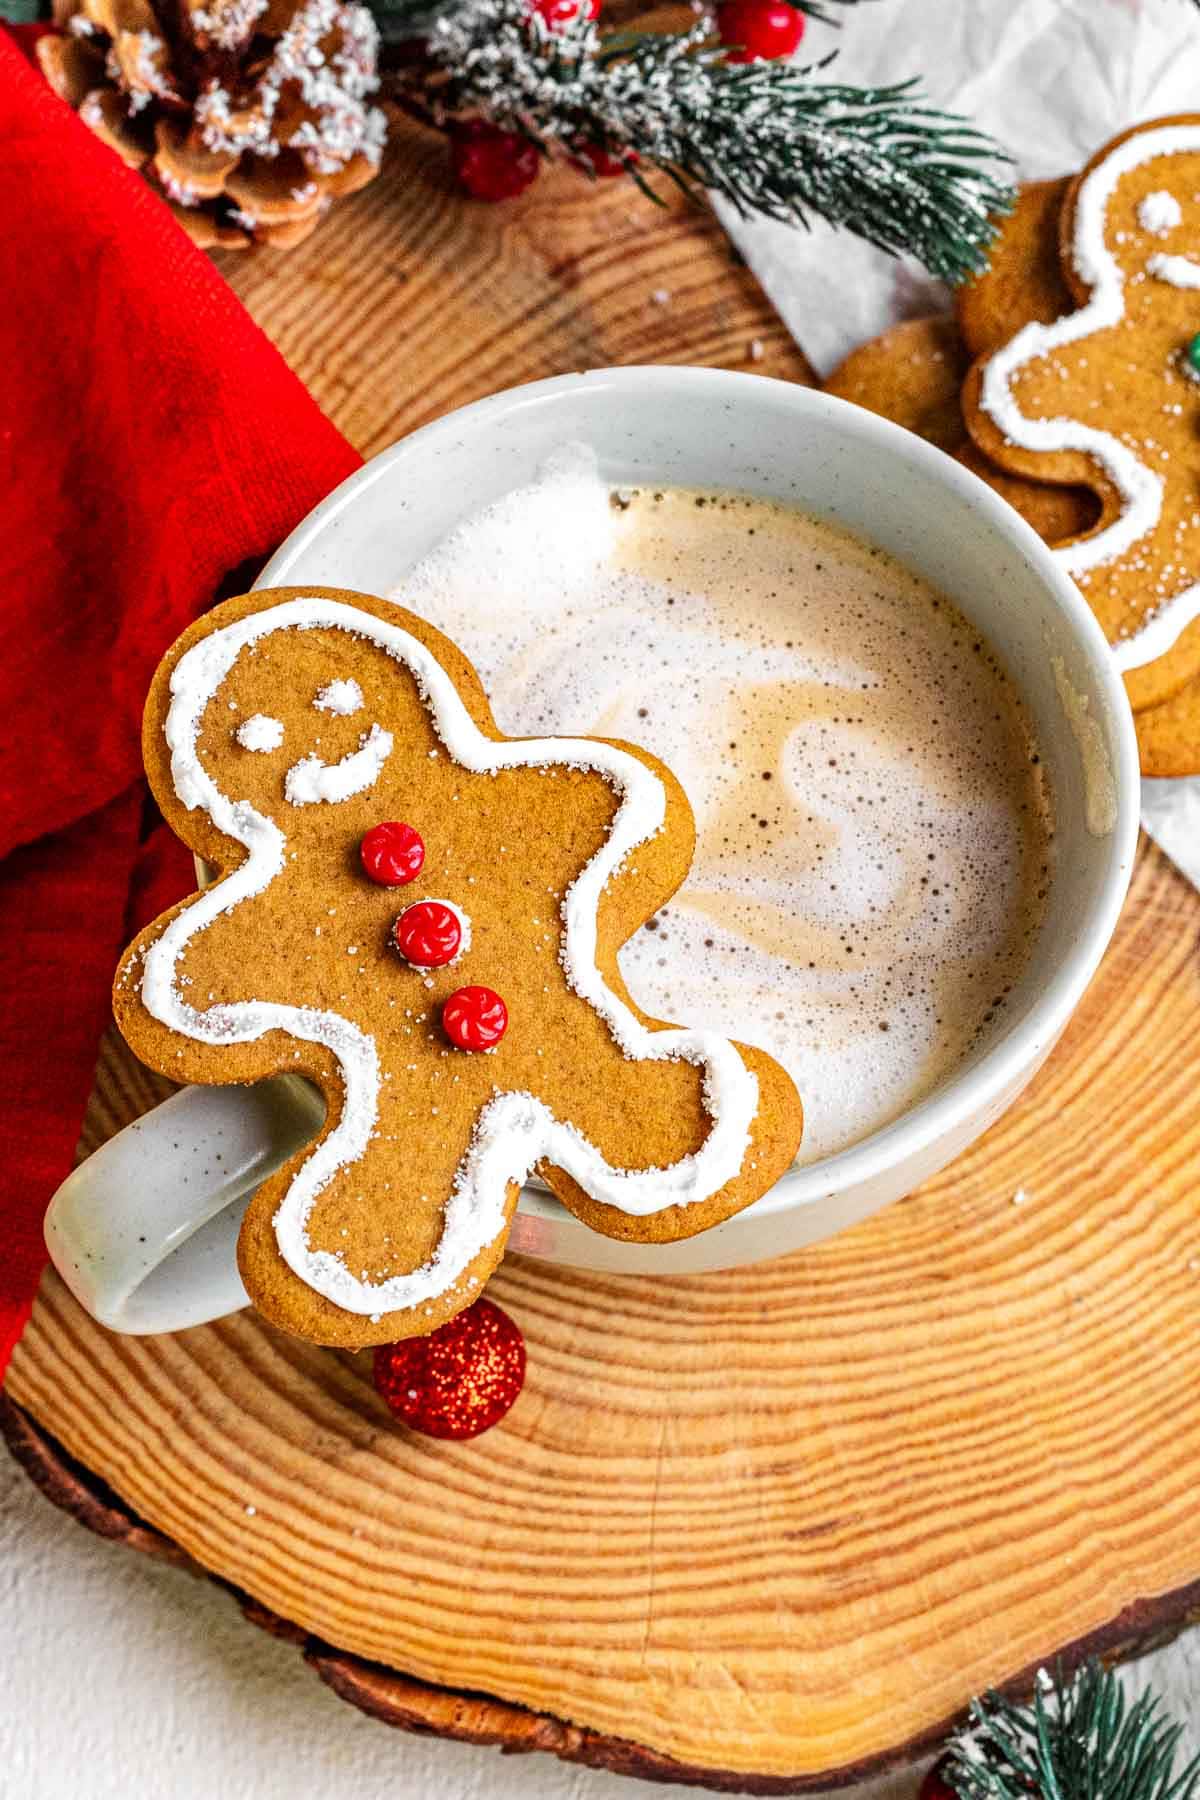 A Gingerbread Man cookie is served with a cup of hot chocolate in a white mug on a wooden serving tray.